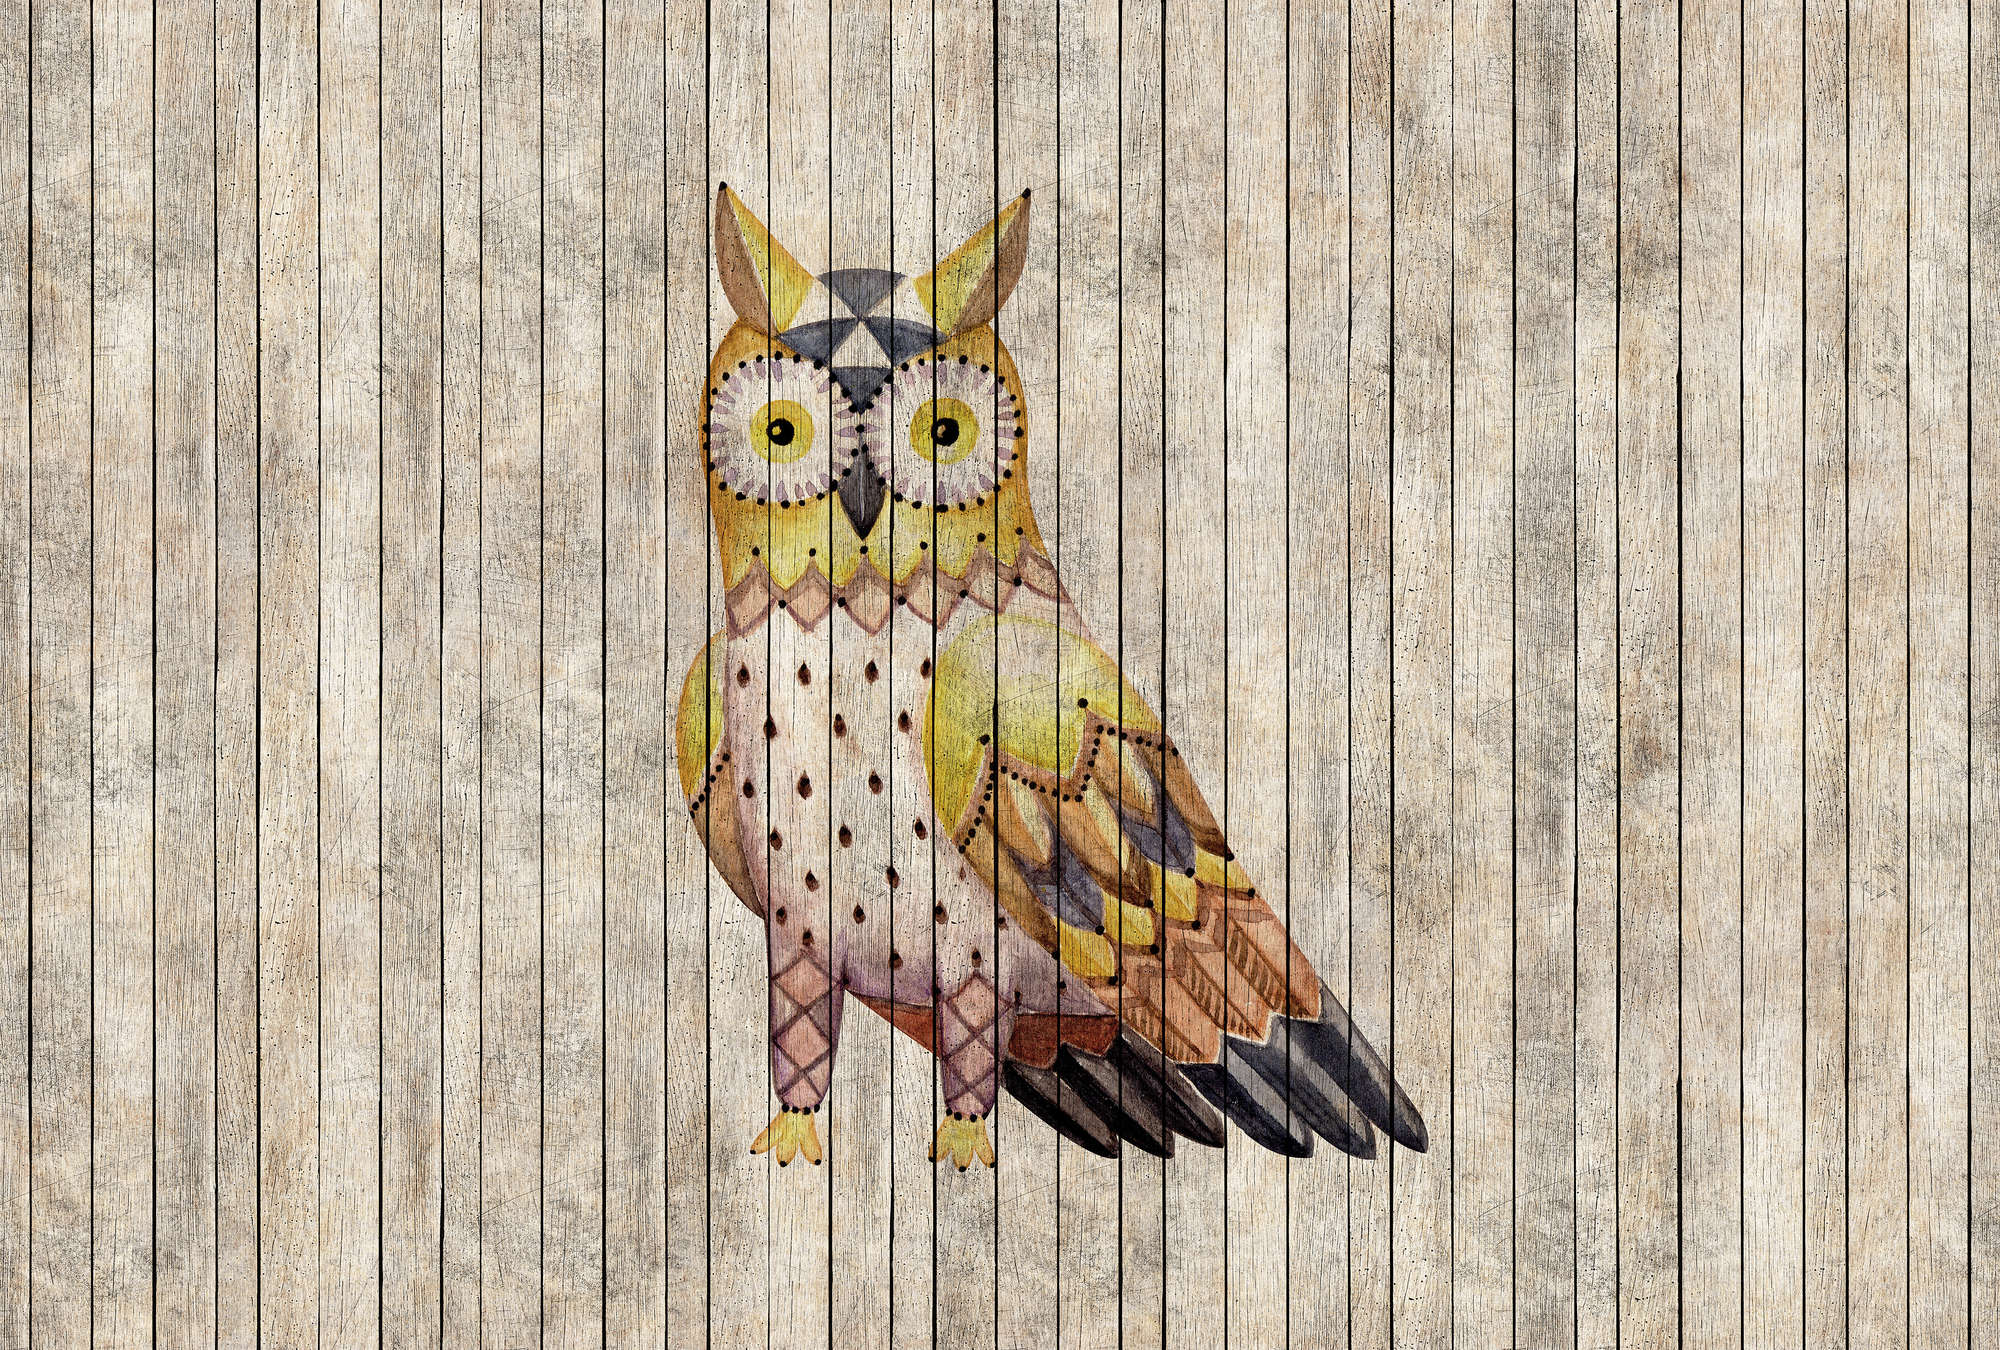             Fairy tale 1 - Wooden board wall with owl photo wallpaper - Beige, Brown | Textured non-woven
        